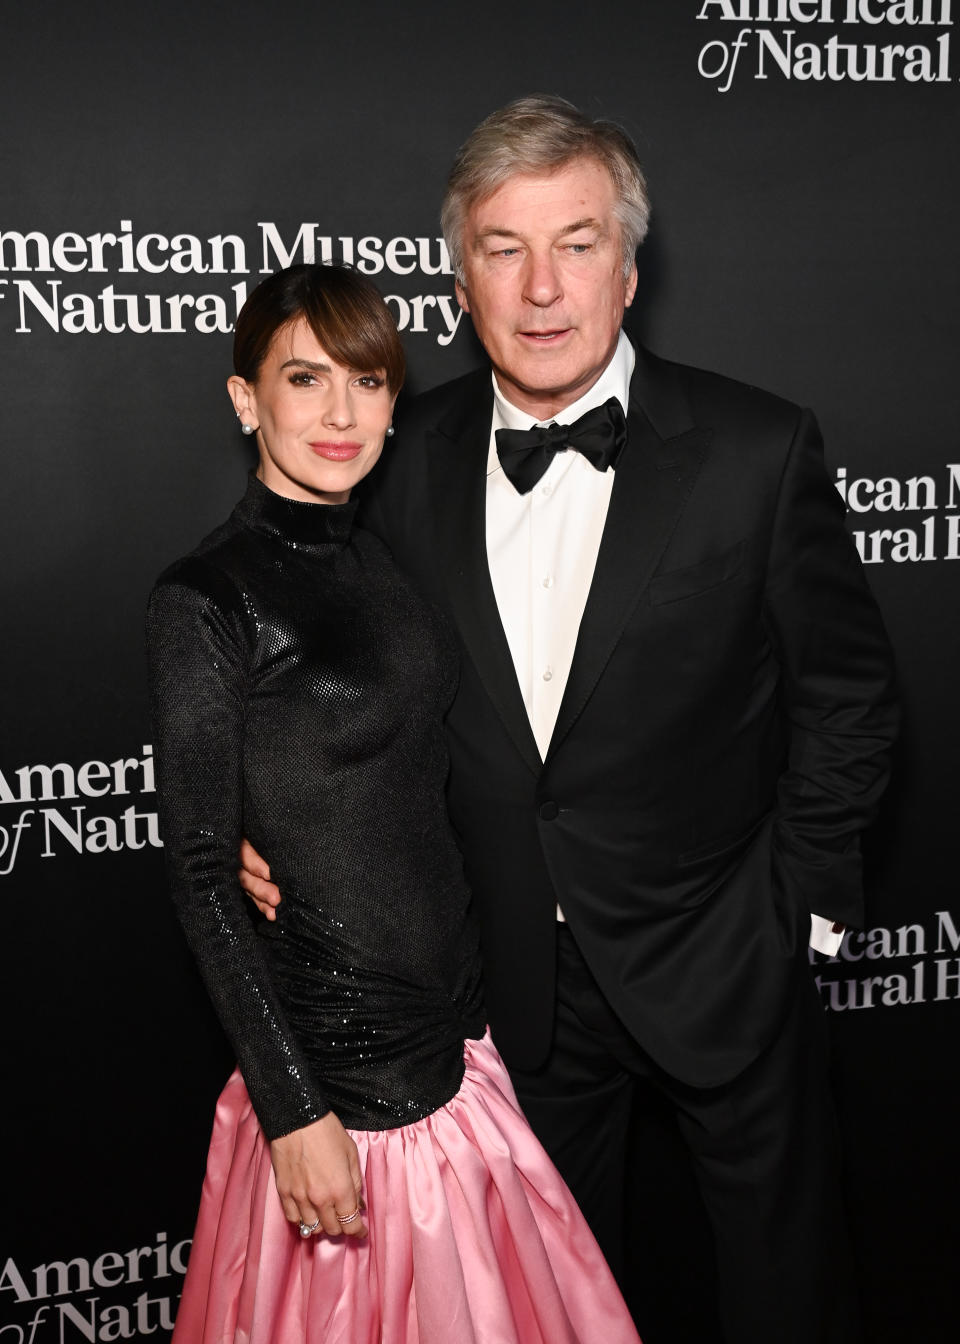 Hilaria Baldwin and Alec Baldwin at the American Museum of Natural History's 2023 Museum Gala held on November 30, 2023 in New York, New York. (Photo by Bryan Bedder/Variety via Getty Images)